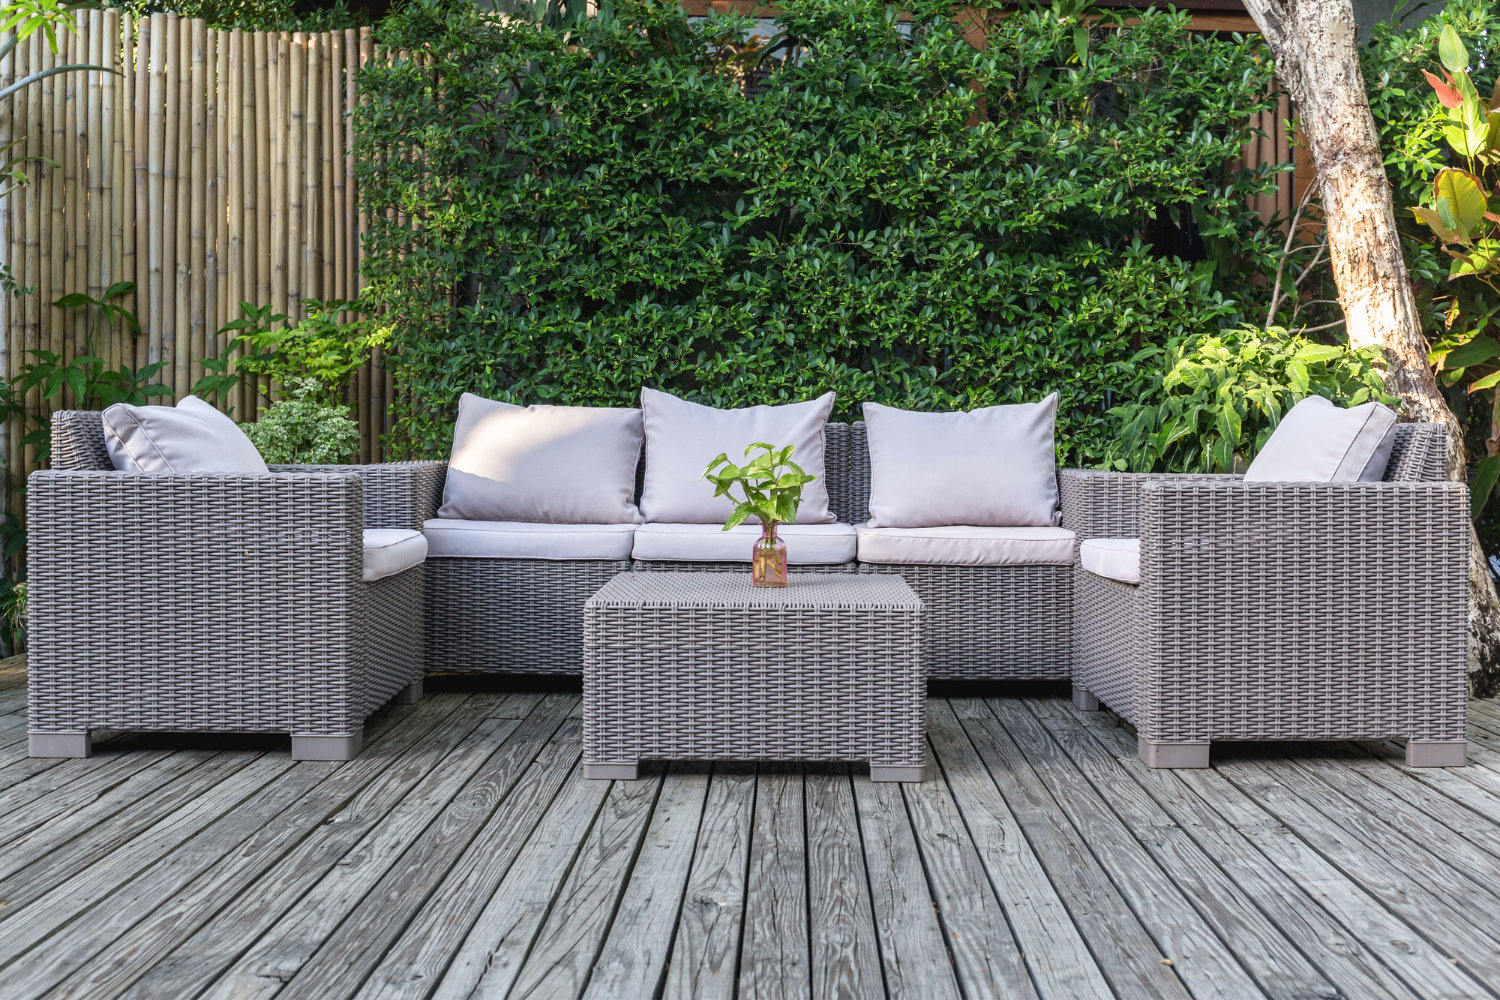 Technorattan vs. rattan – what’s the real difference?